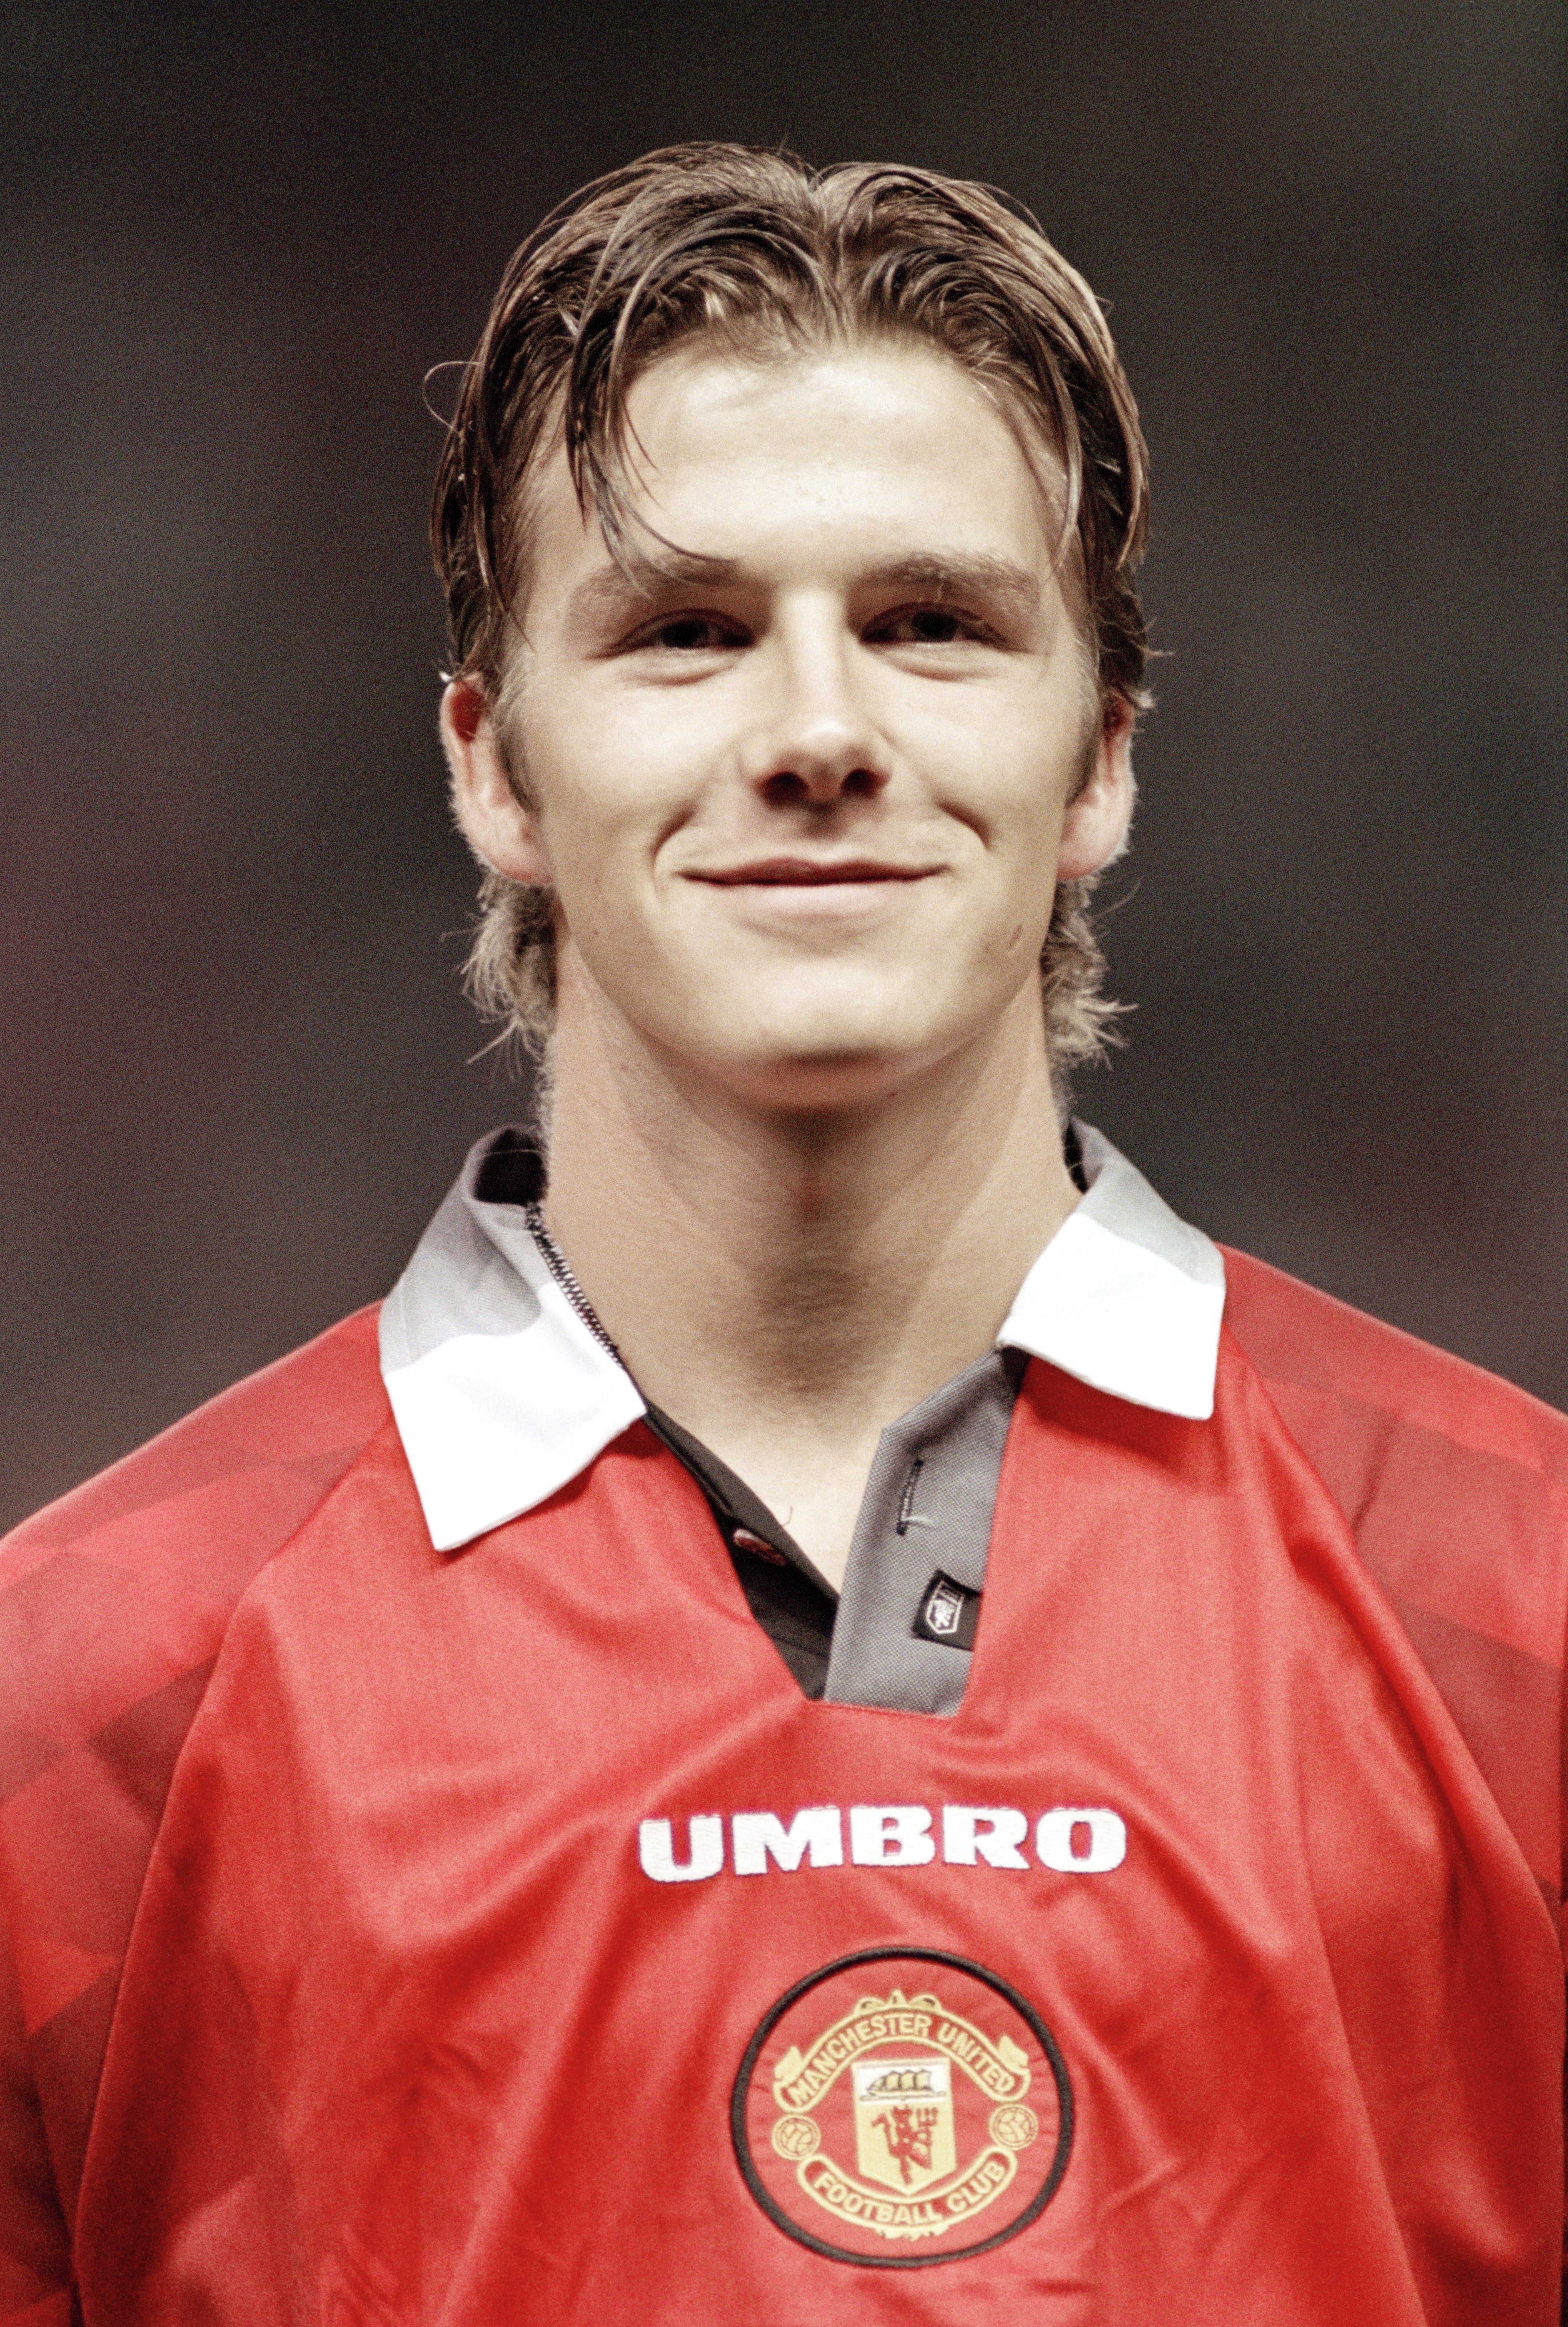 David Beckham of Manchester United poses before the UEFA Champions League match on September 25, 1996, in Manchester, England | Source: Getty Images